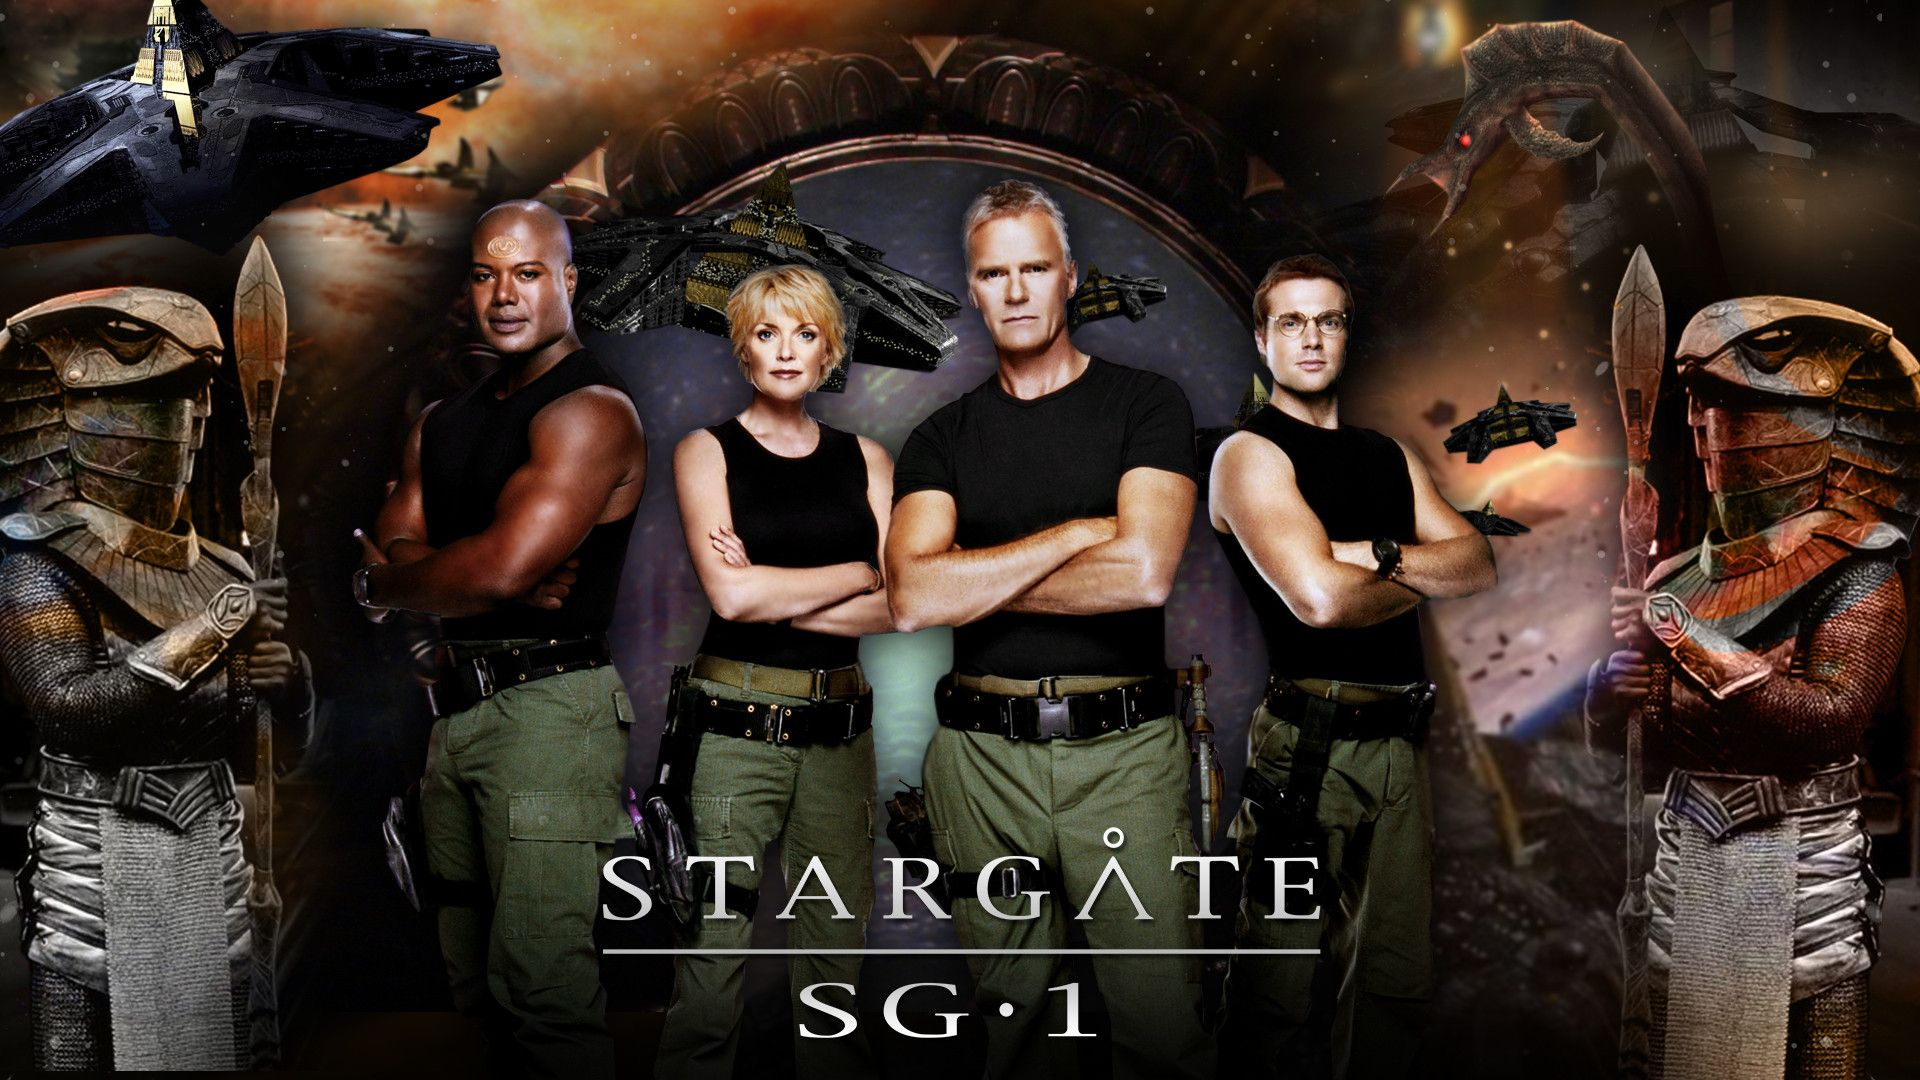 1920x1080 Stargate SG 1 Wallpapers Top Free Stargate SG 1 Backgrounds